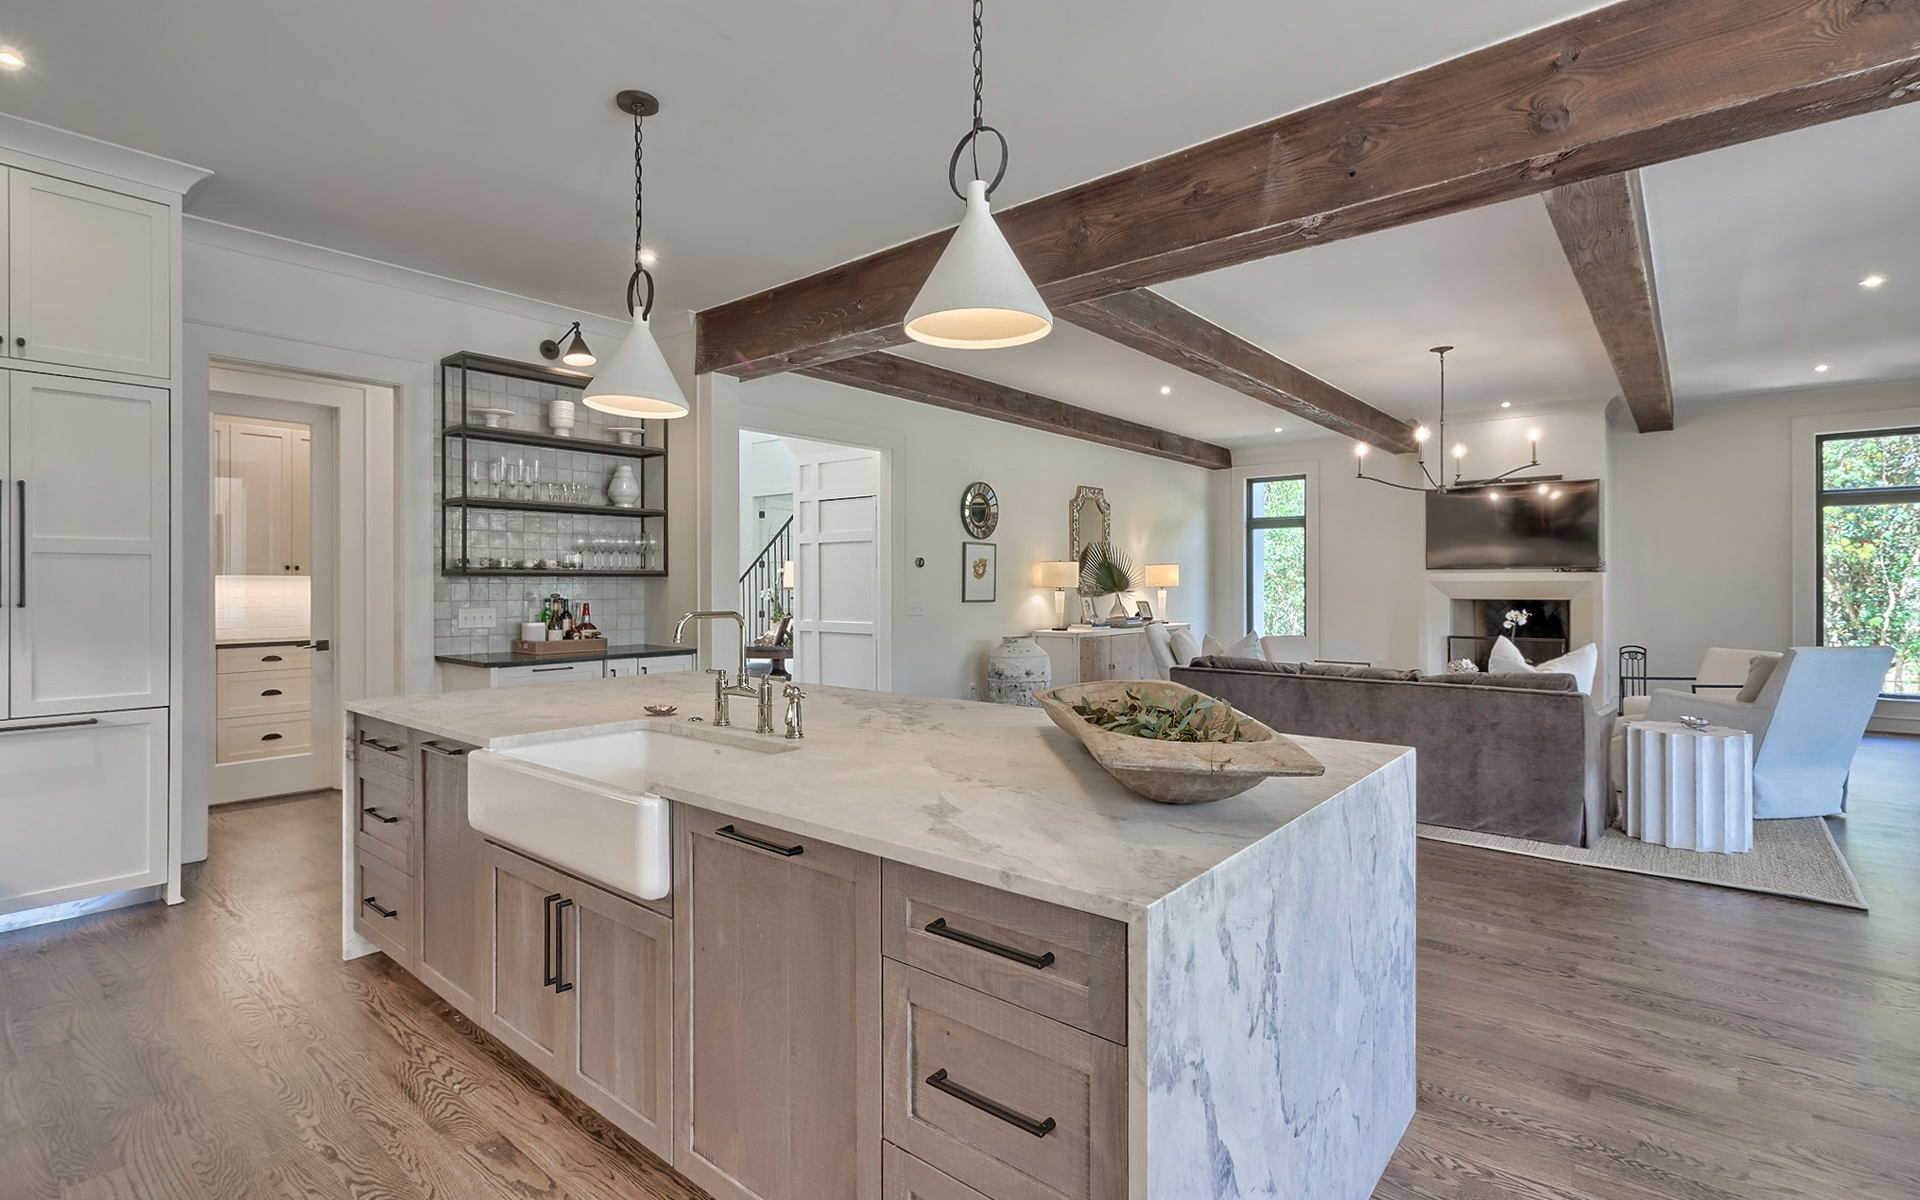 LaFaye Custom Home Builders' Gorgeous Bright & Airy Open Kitchen